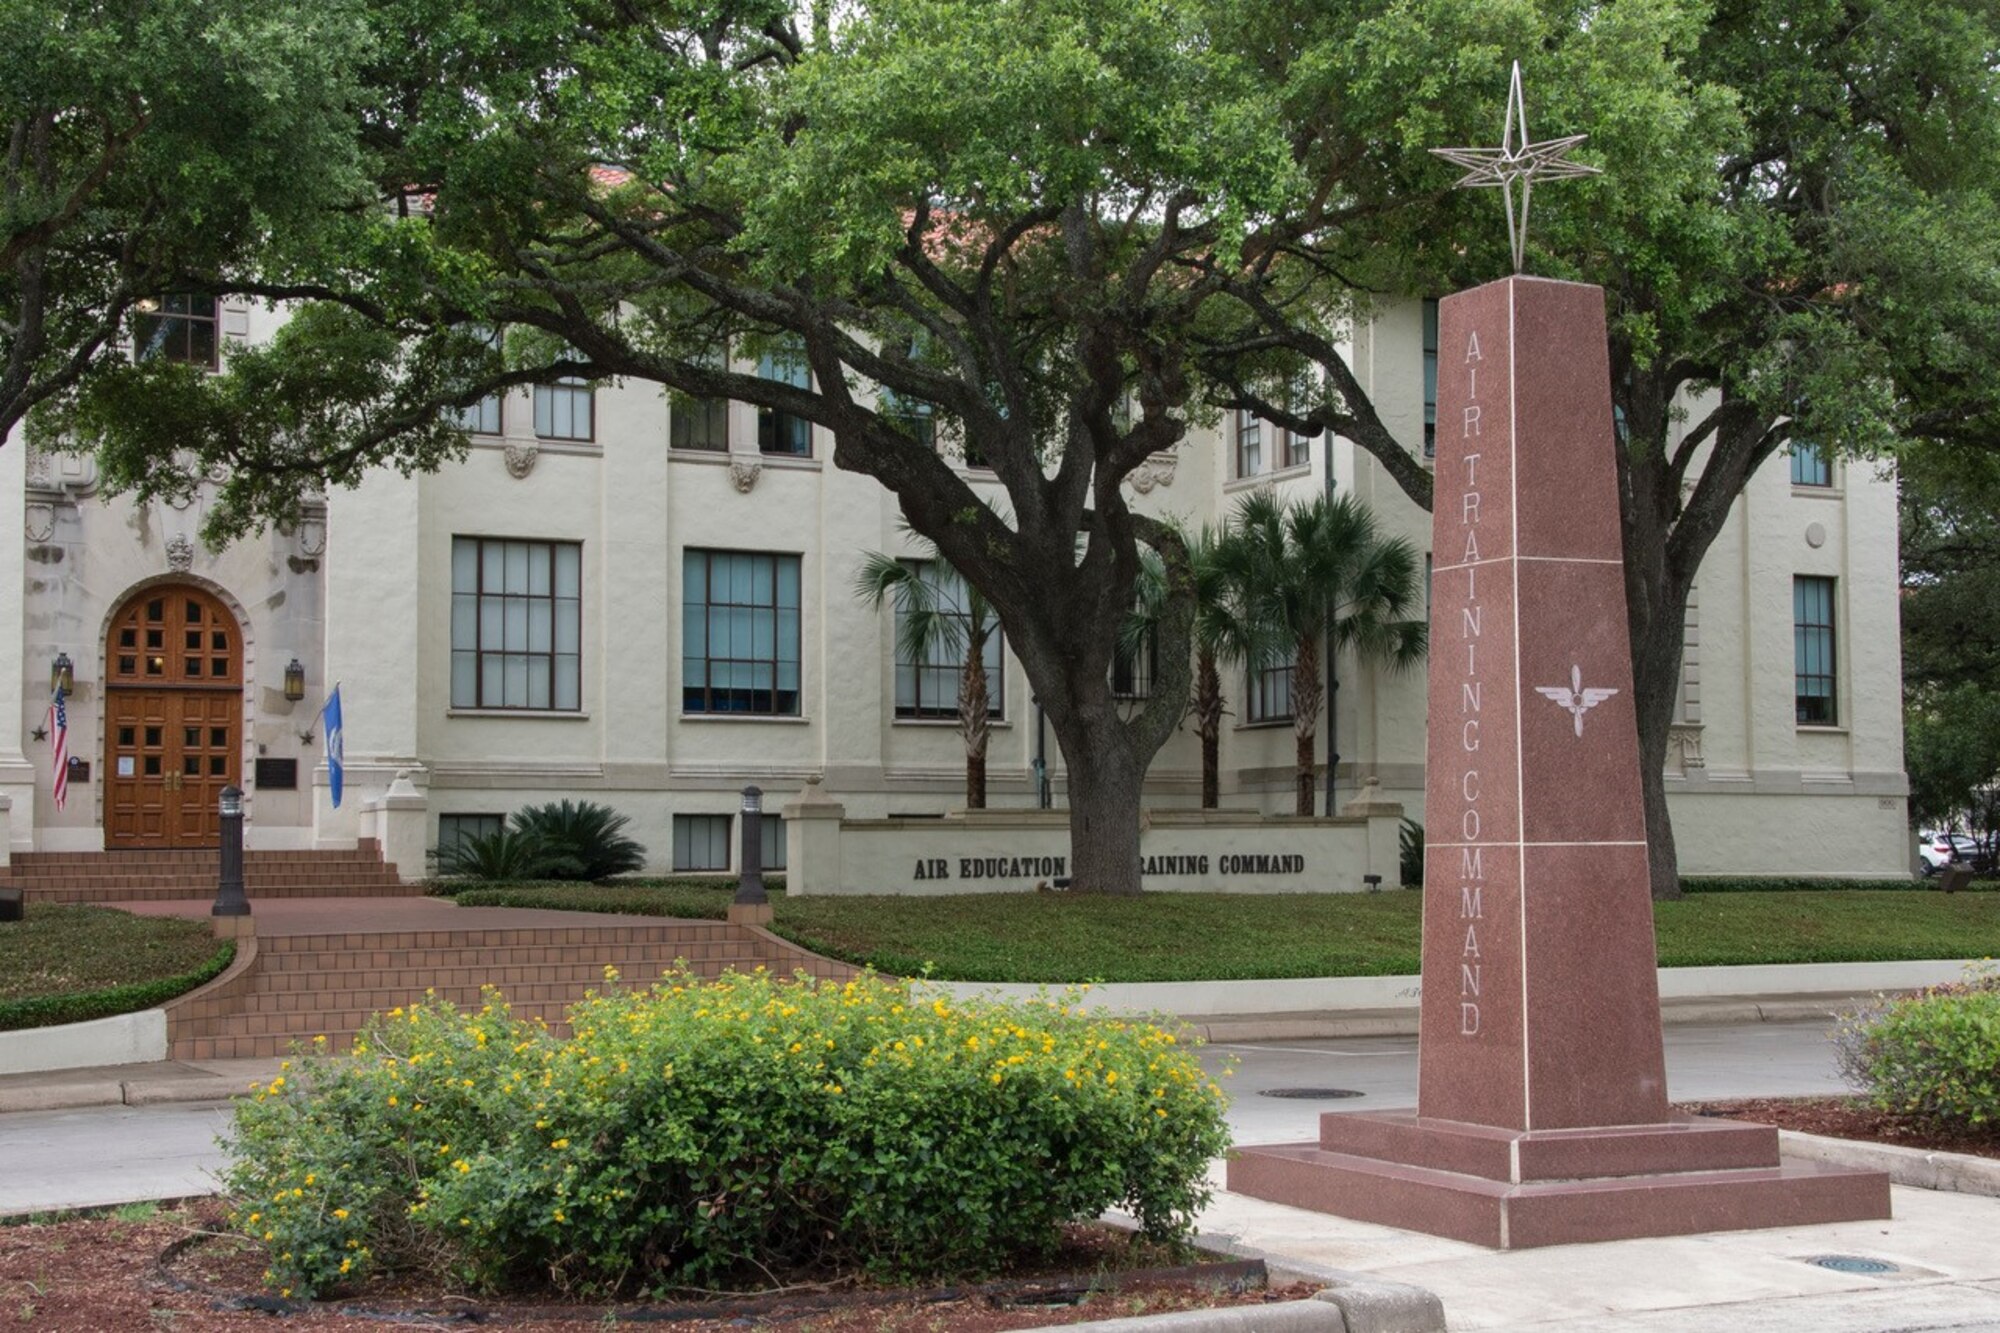 A picture of the Instructor Monument wit the AETC headquarters building in the background.